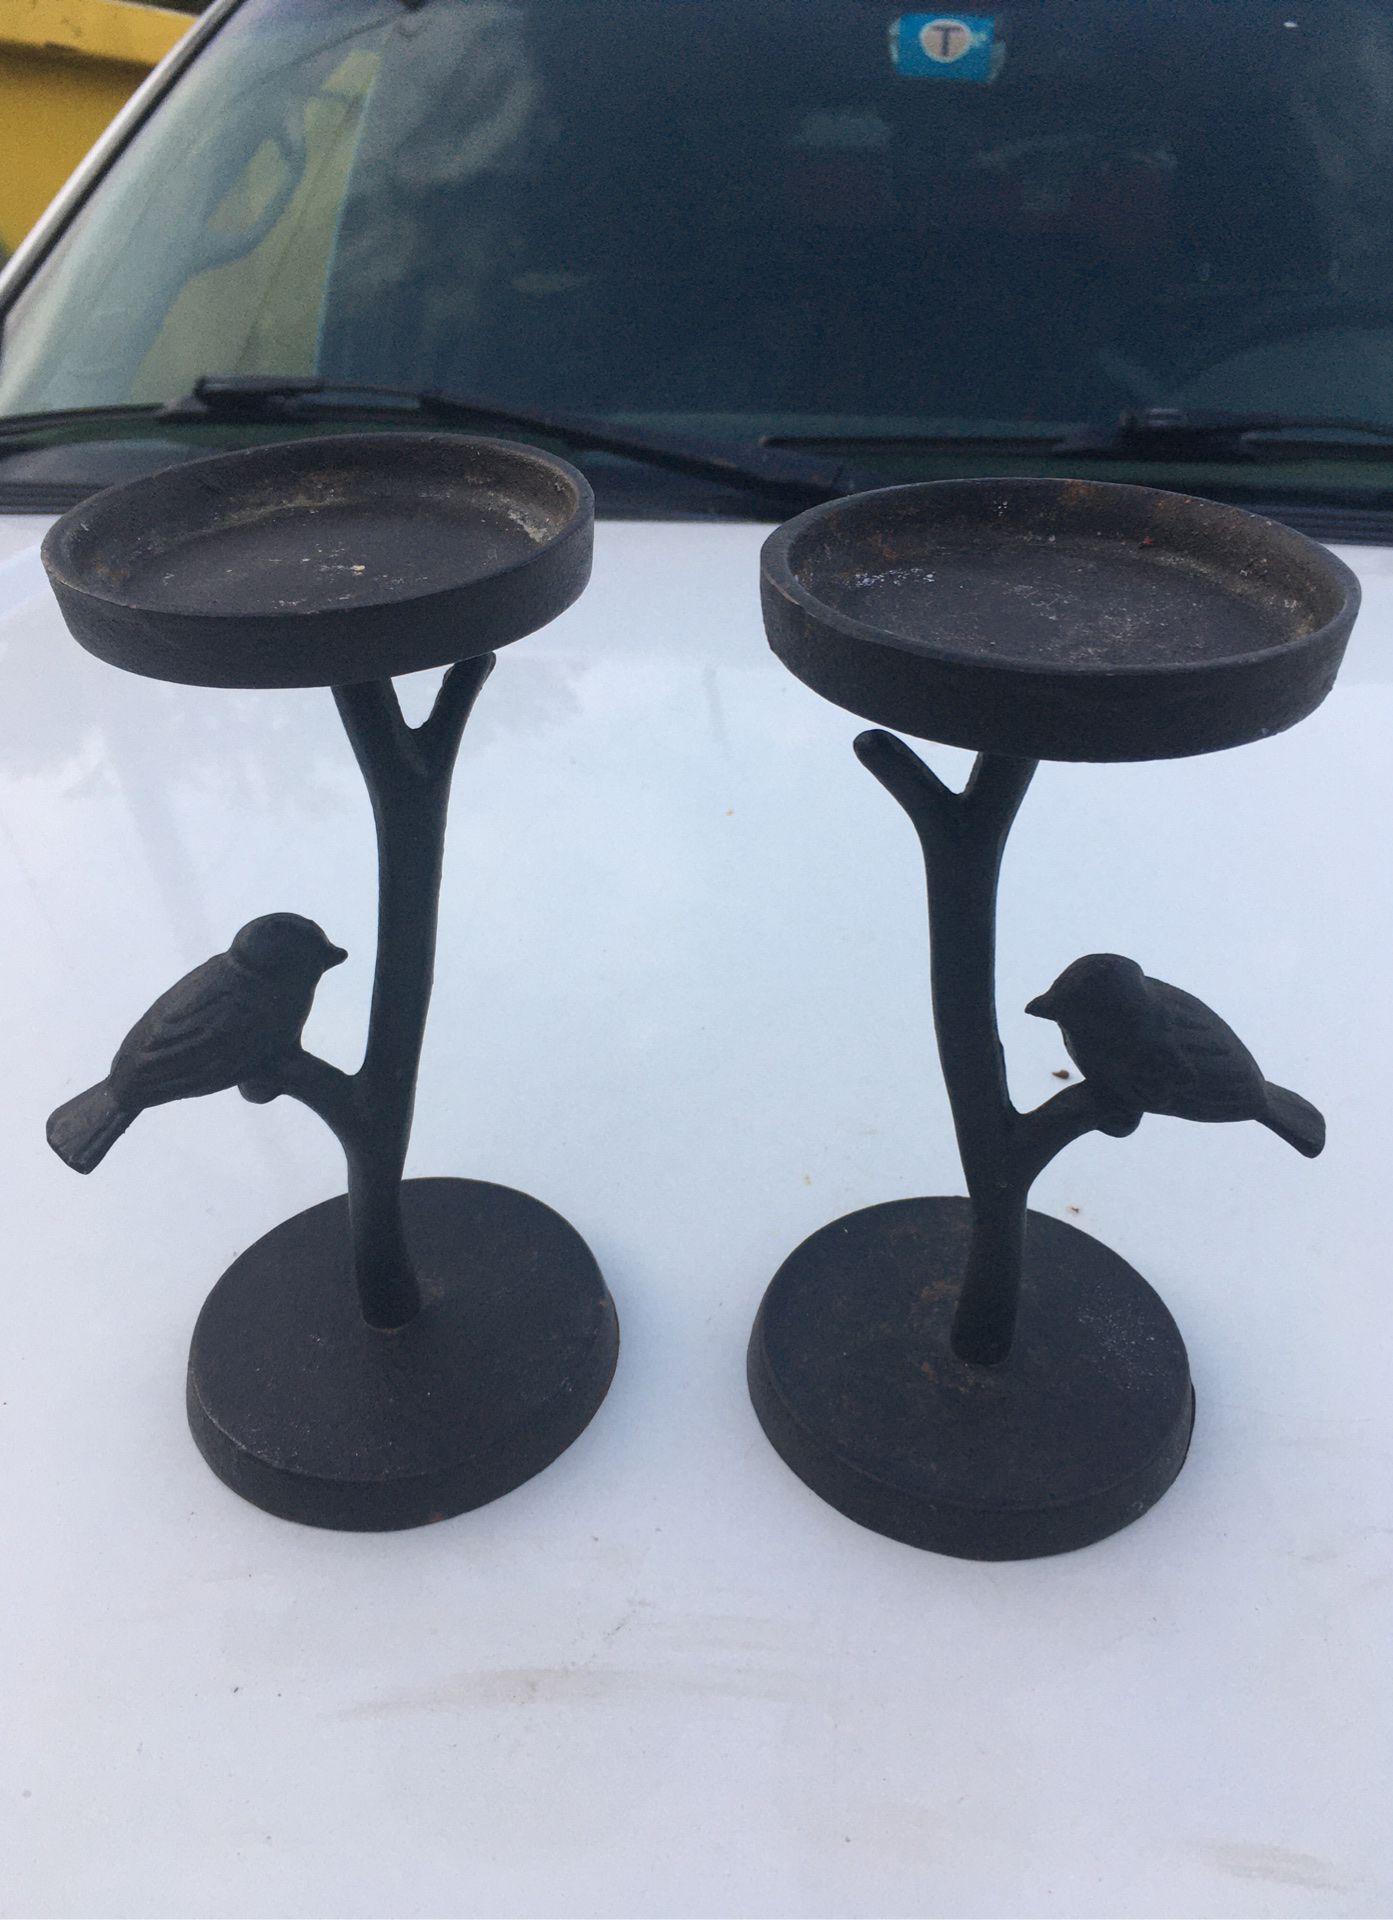 2 cast iron candle holders 8” x 4” birds on a branch